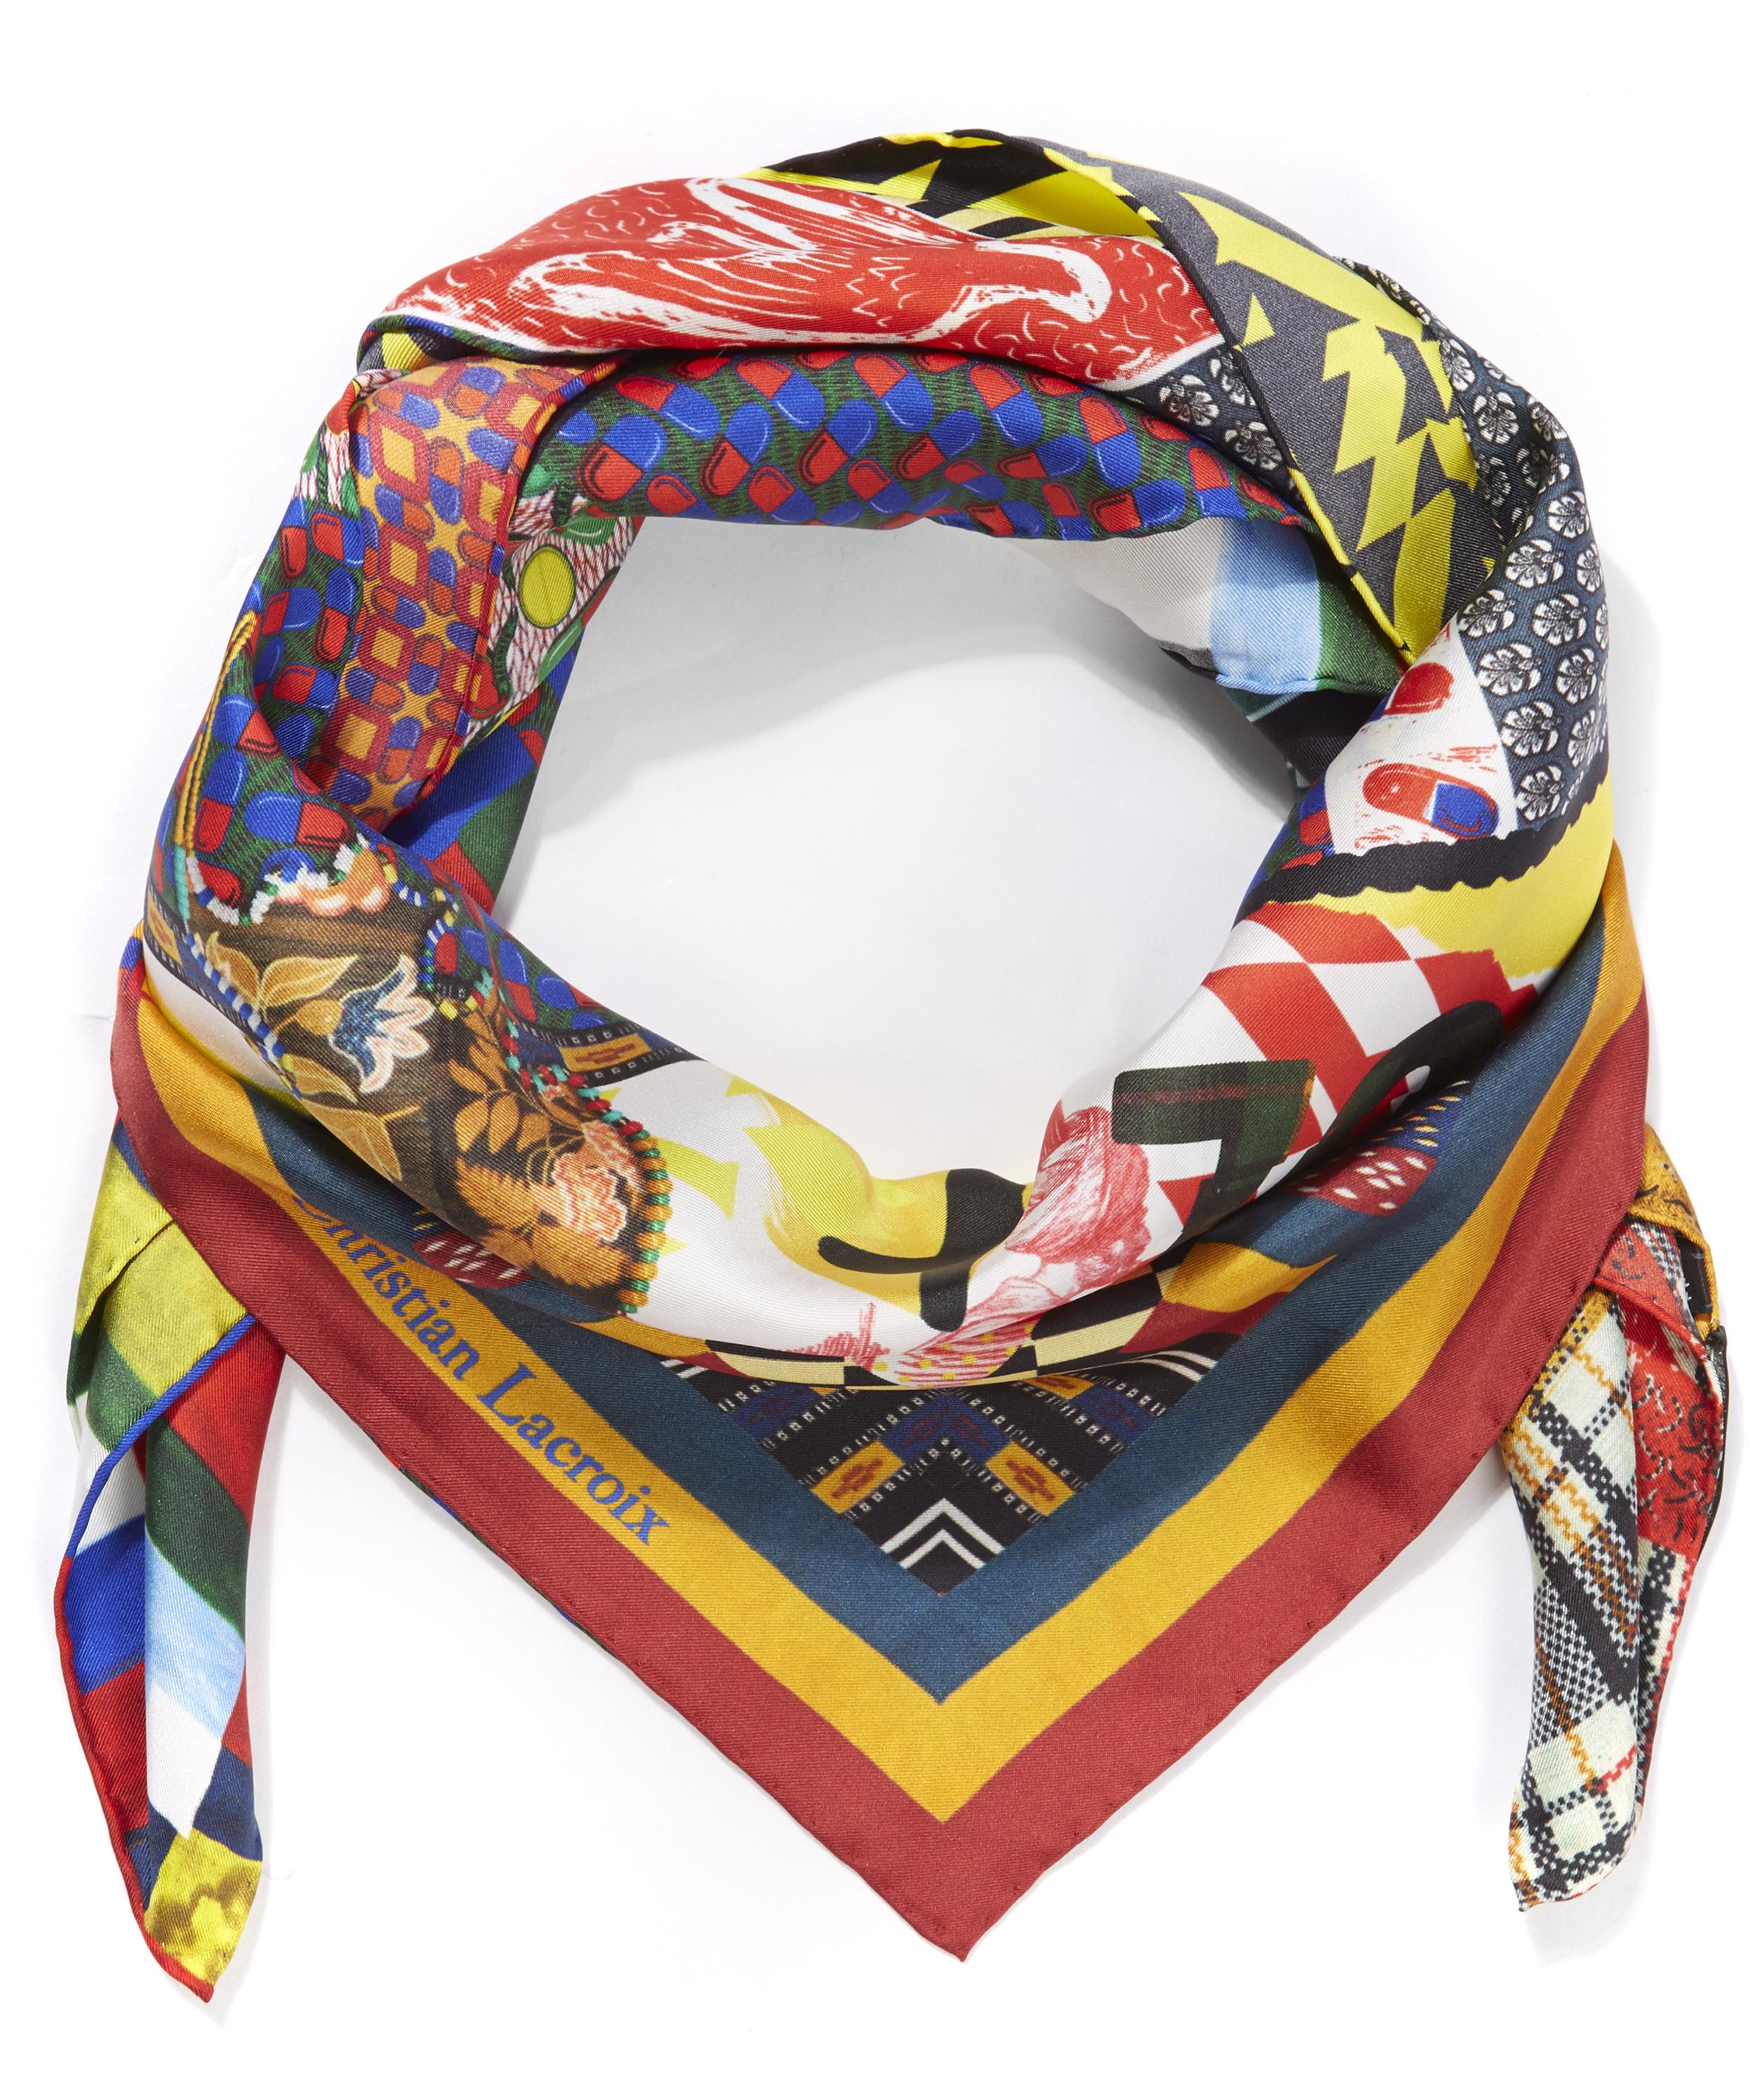 Together Scarf | Liberty London